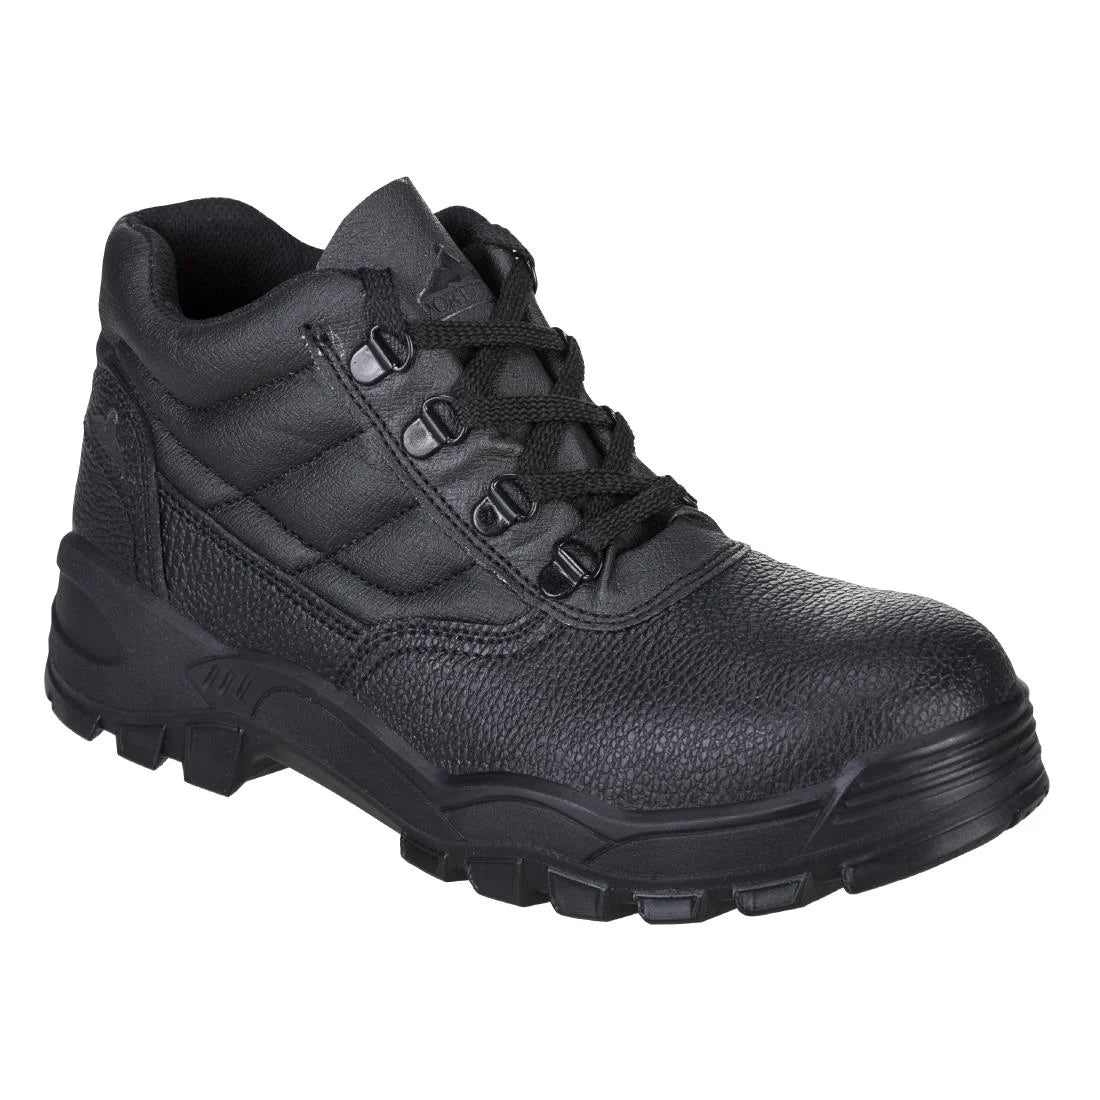 BA059-44 Portwest Protector Boot S1P Black Size 44 JD Catering Equipment Solutions Ltd